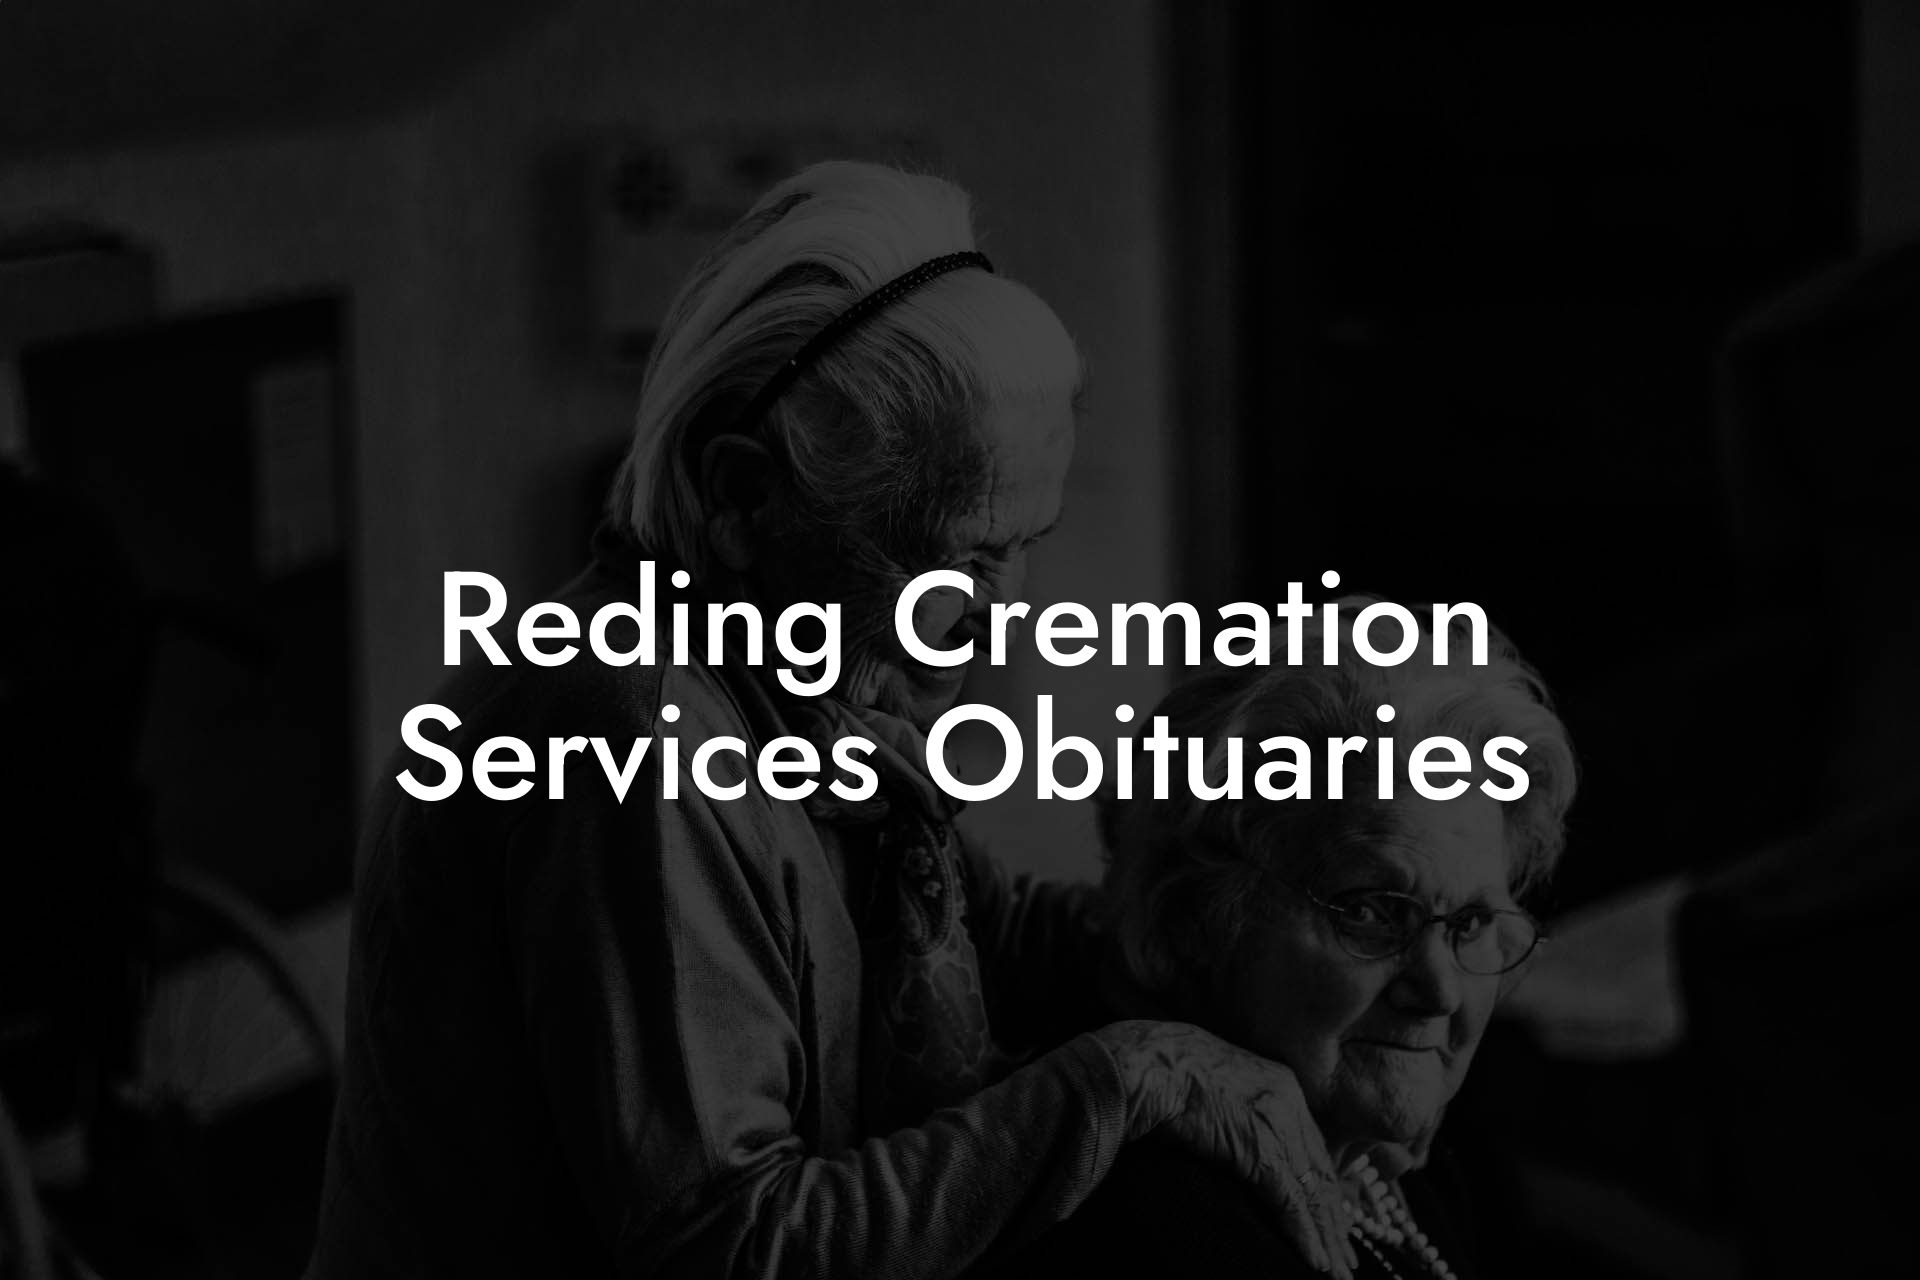 Reding Cremation Services Obituaries